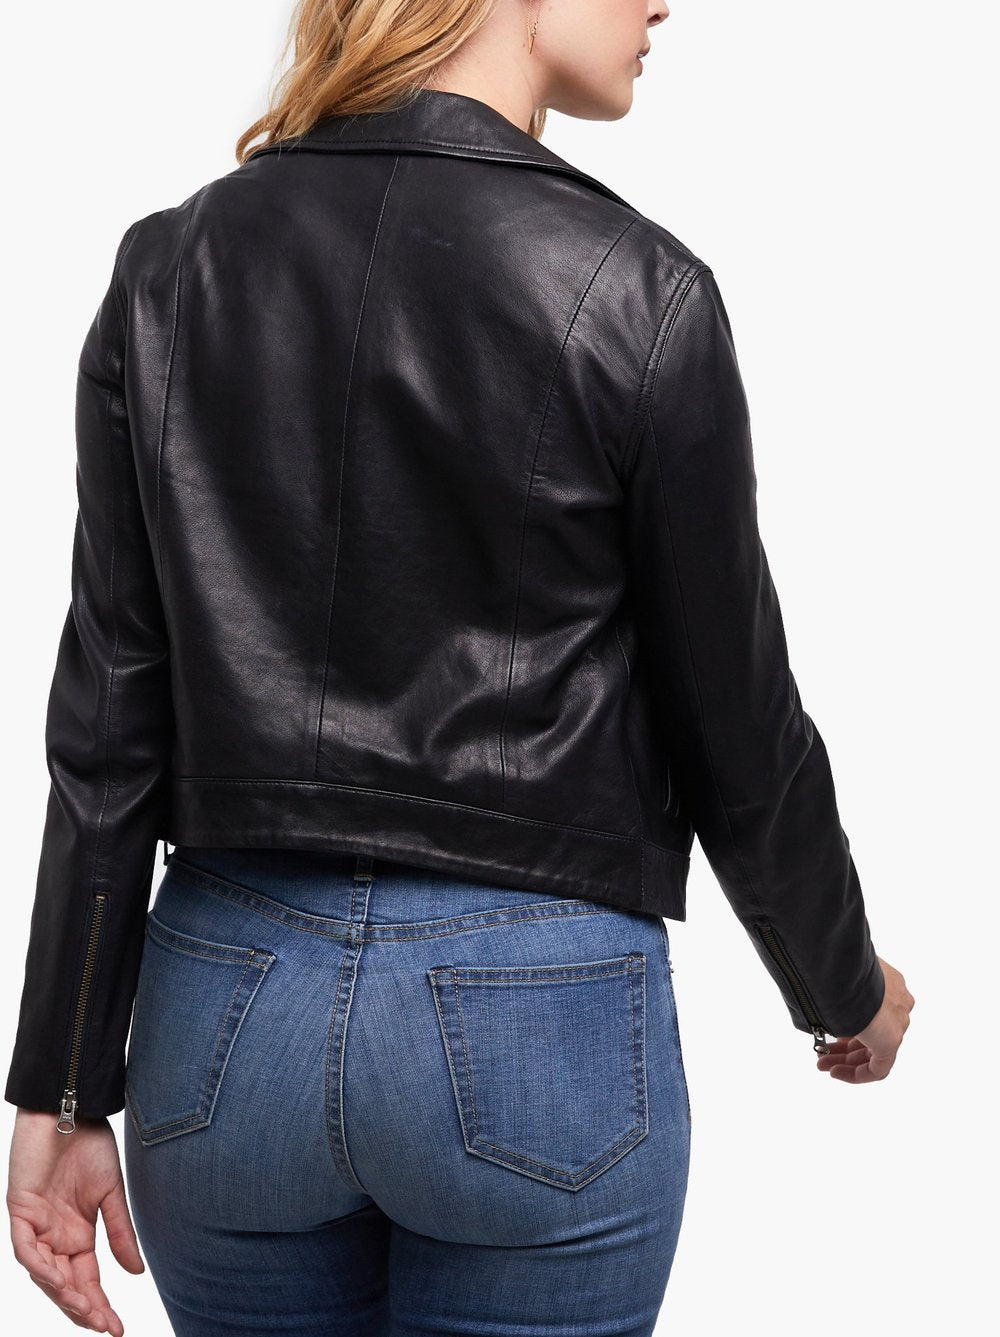 Able Maha Leather Jacket in Black Outerwear in  at Wrapsody